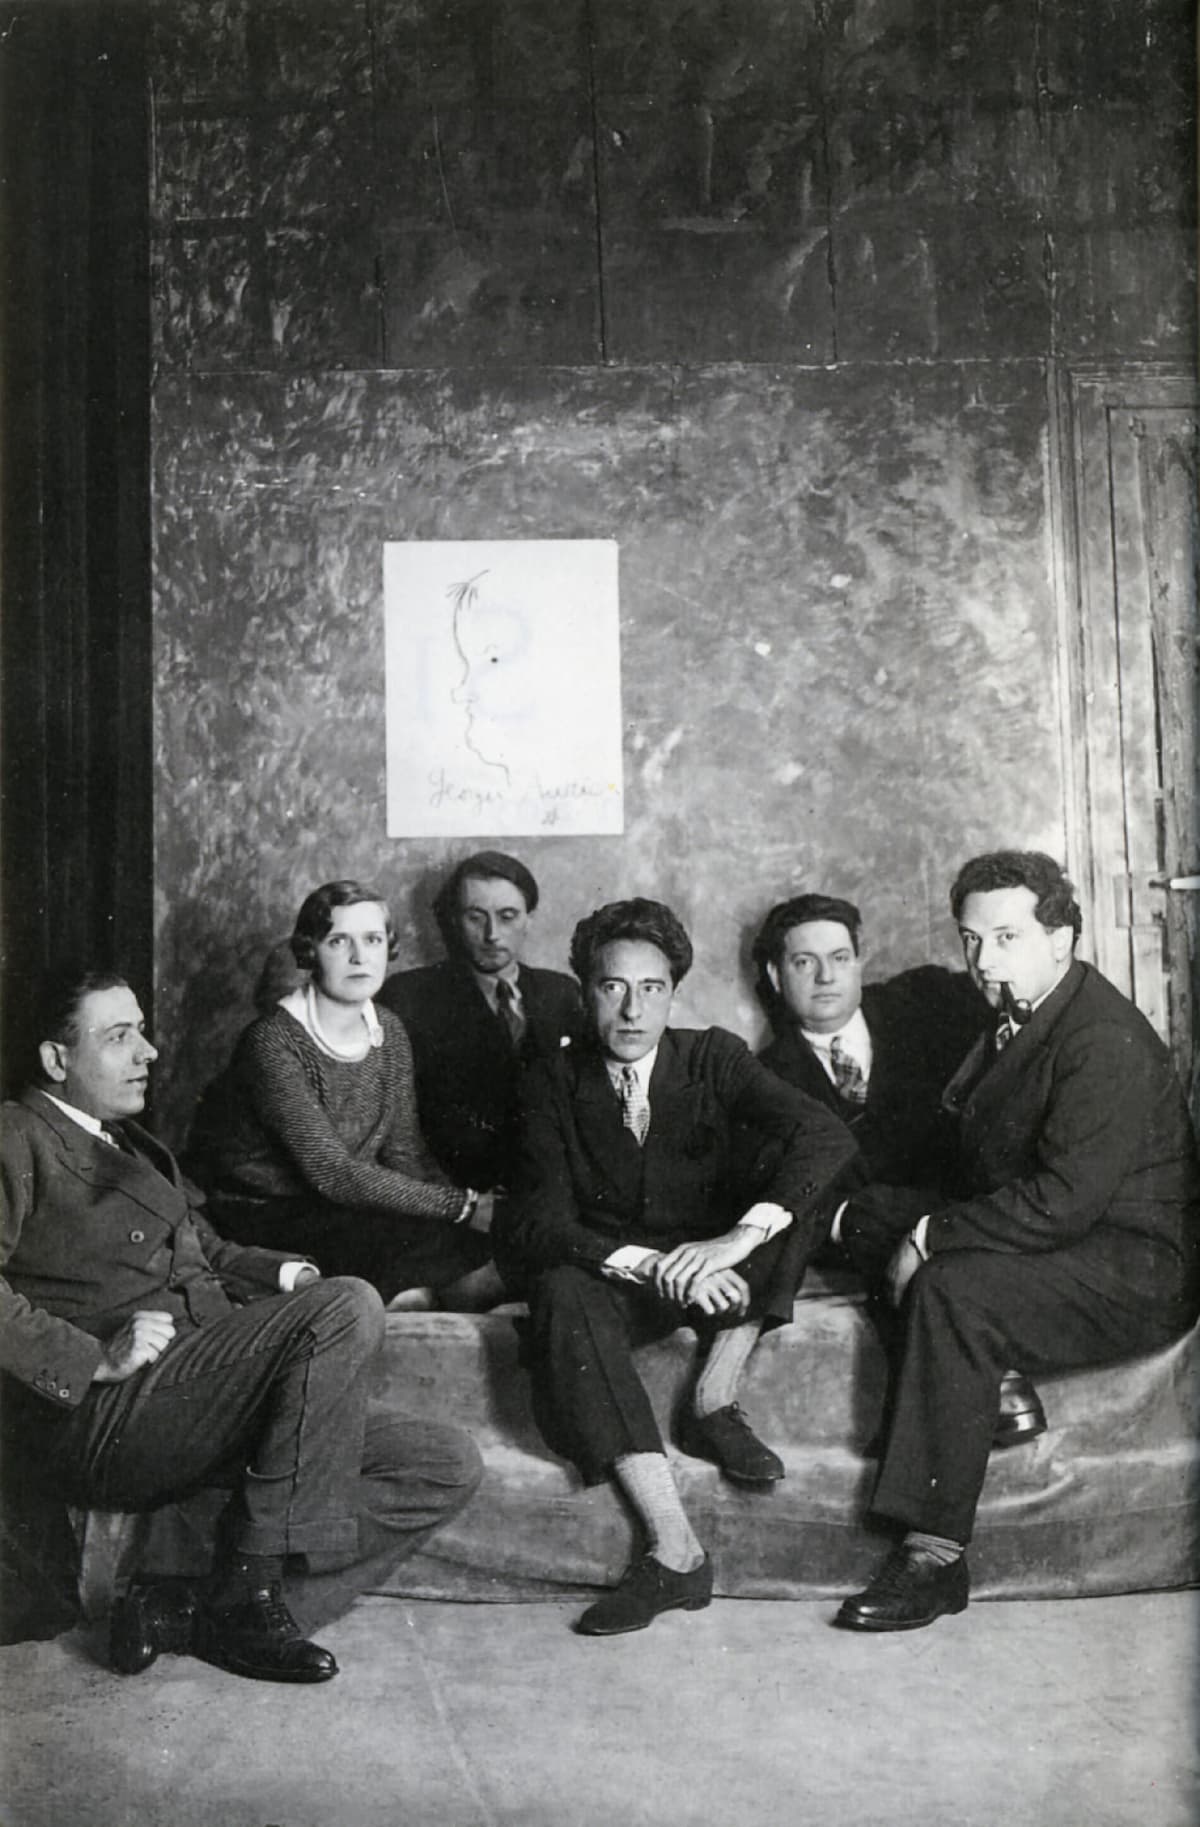 Les Six, left to right: Francis Poulenc, Germaine Taileferre, Louis Durey, Jean Cocteau, Darius Milhaud, Arthur Honegger. Sketch of Georges Auric on the wall behind them.